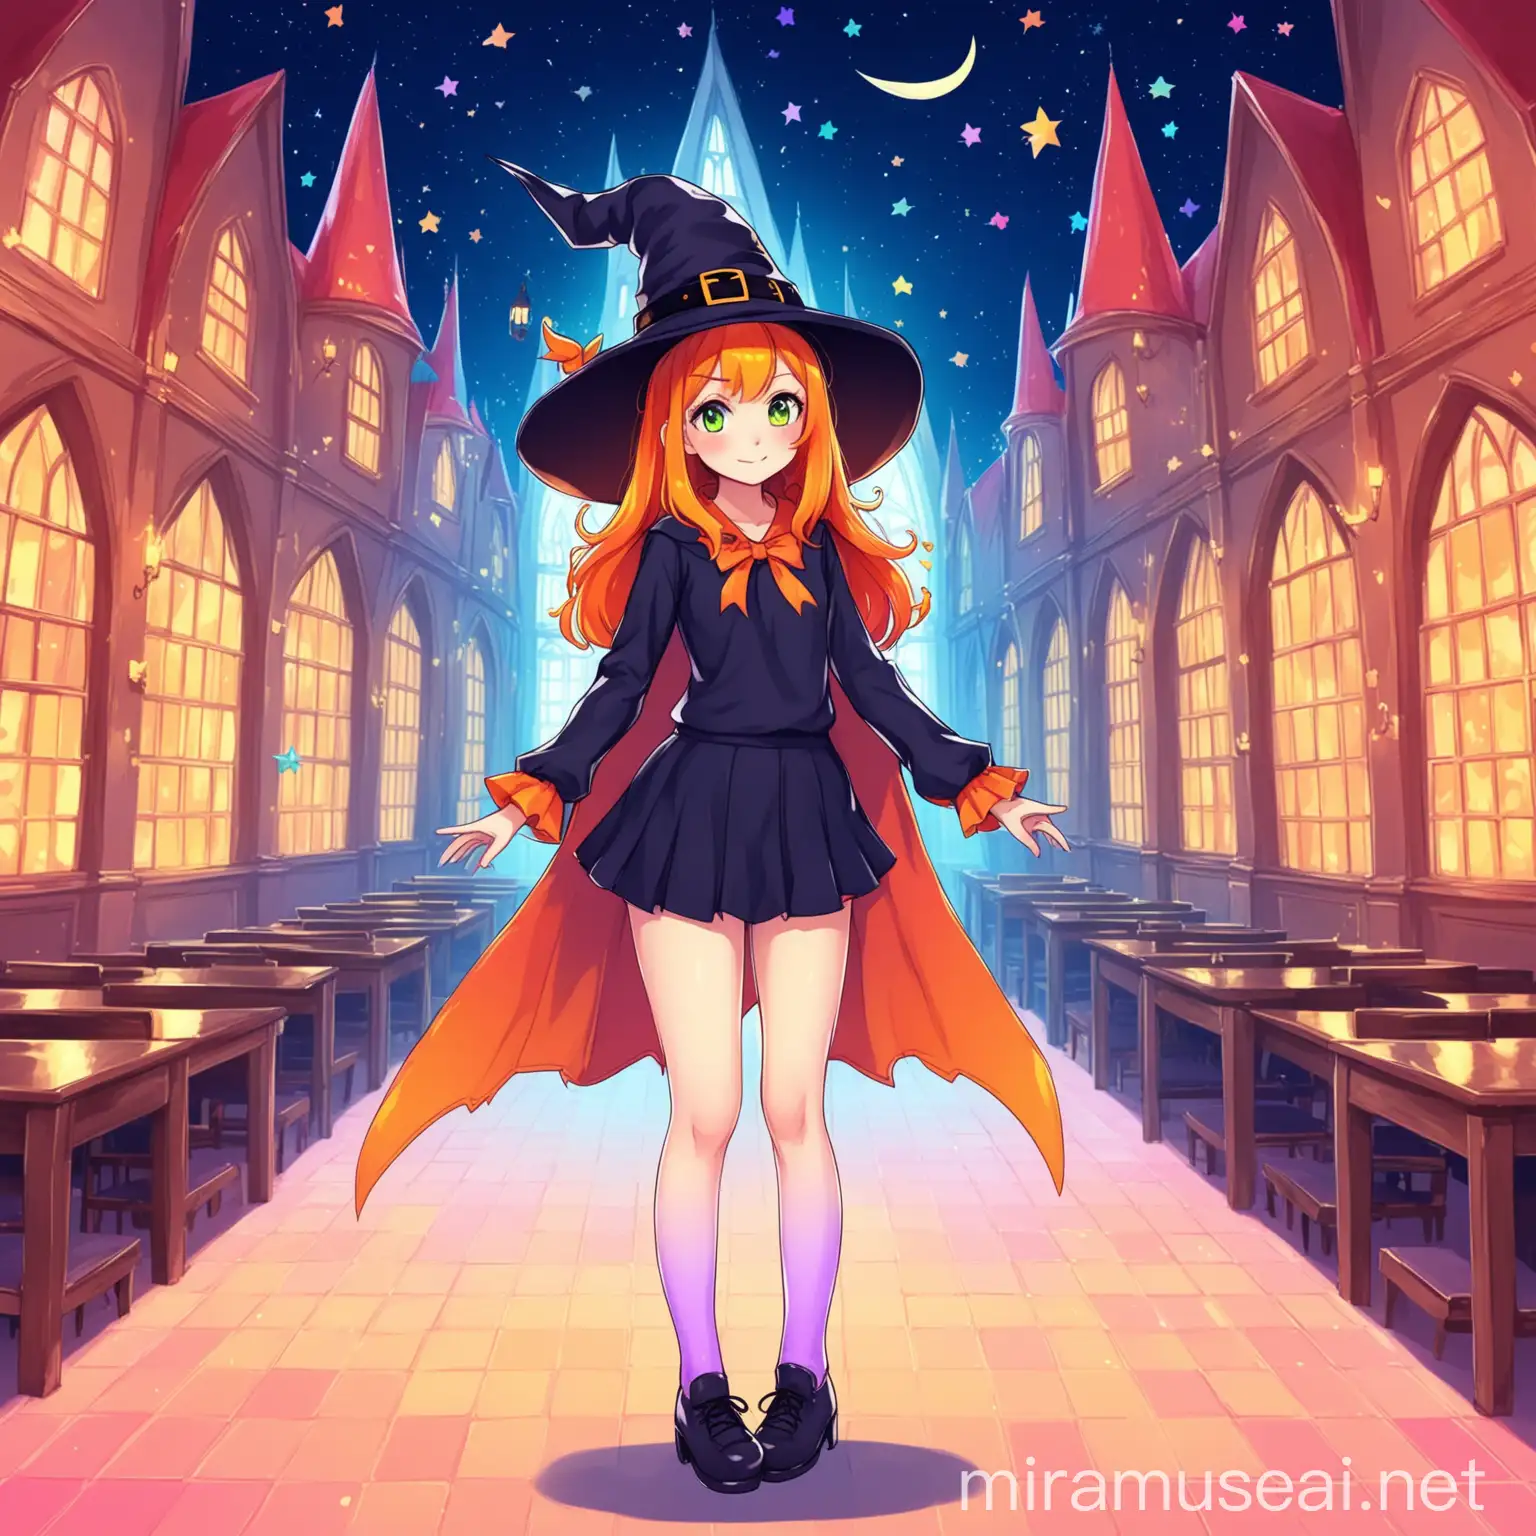 Fullbody, girl, cute, warmhearted, witch, bright colours,teenager,tight clothing,academy background